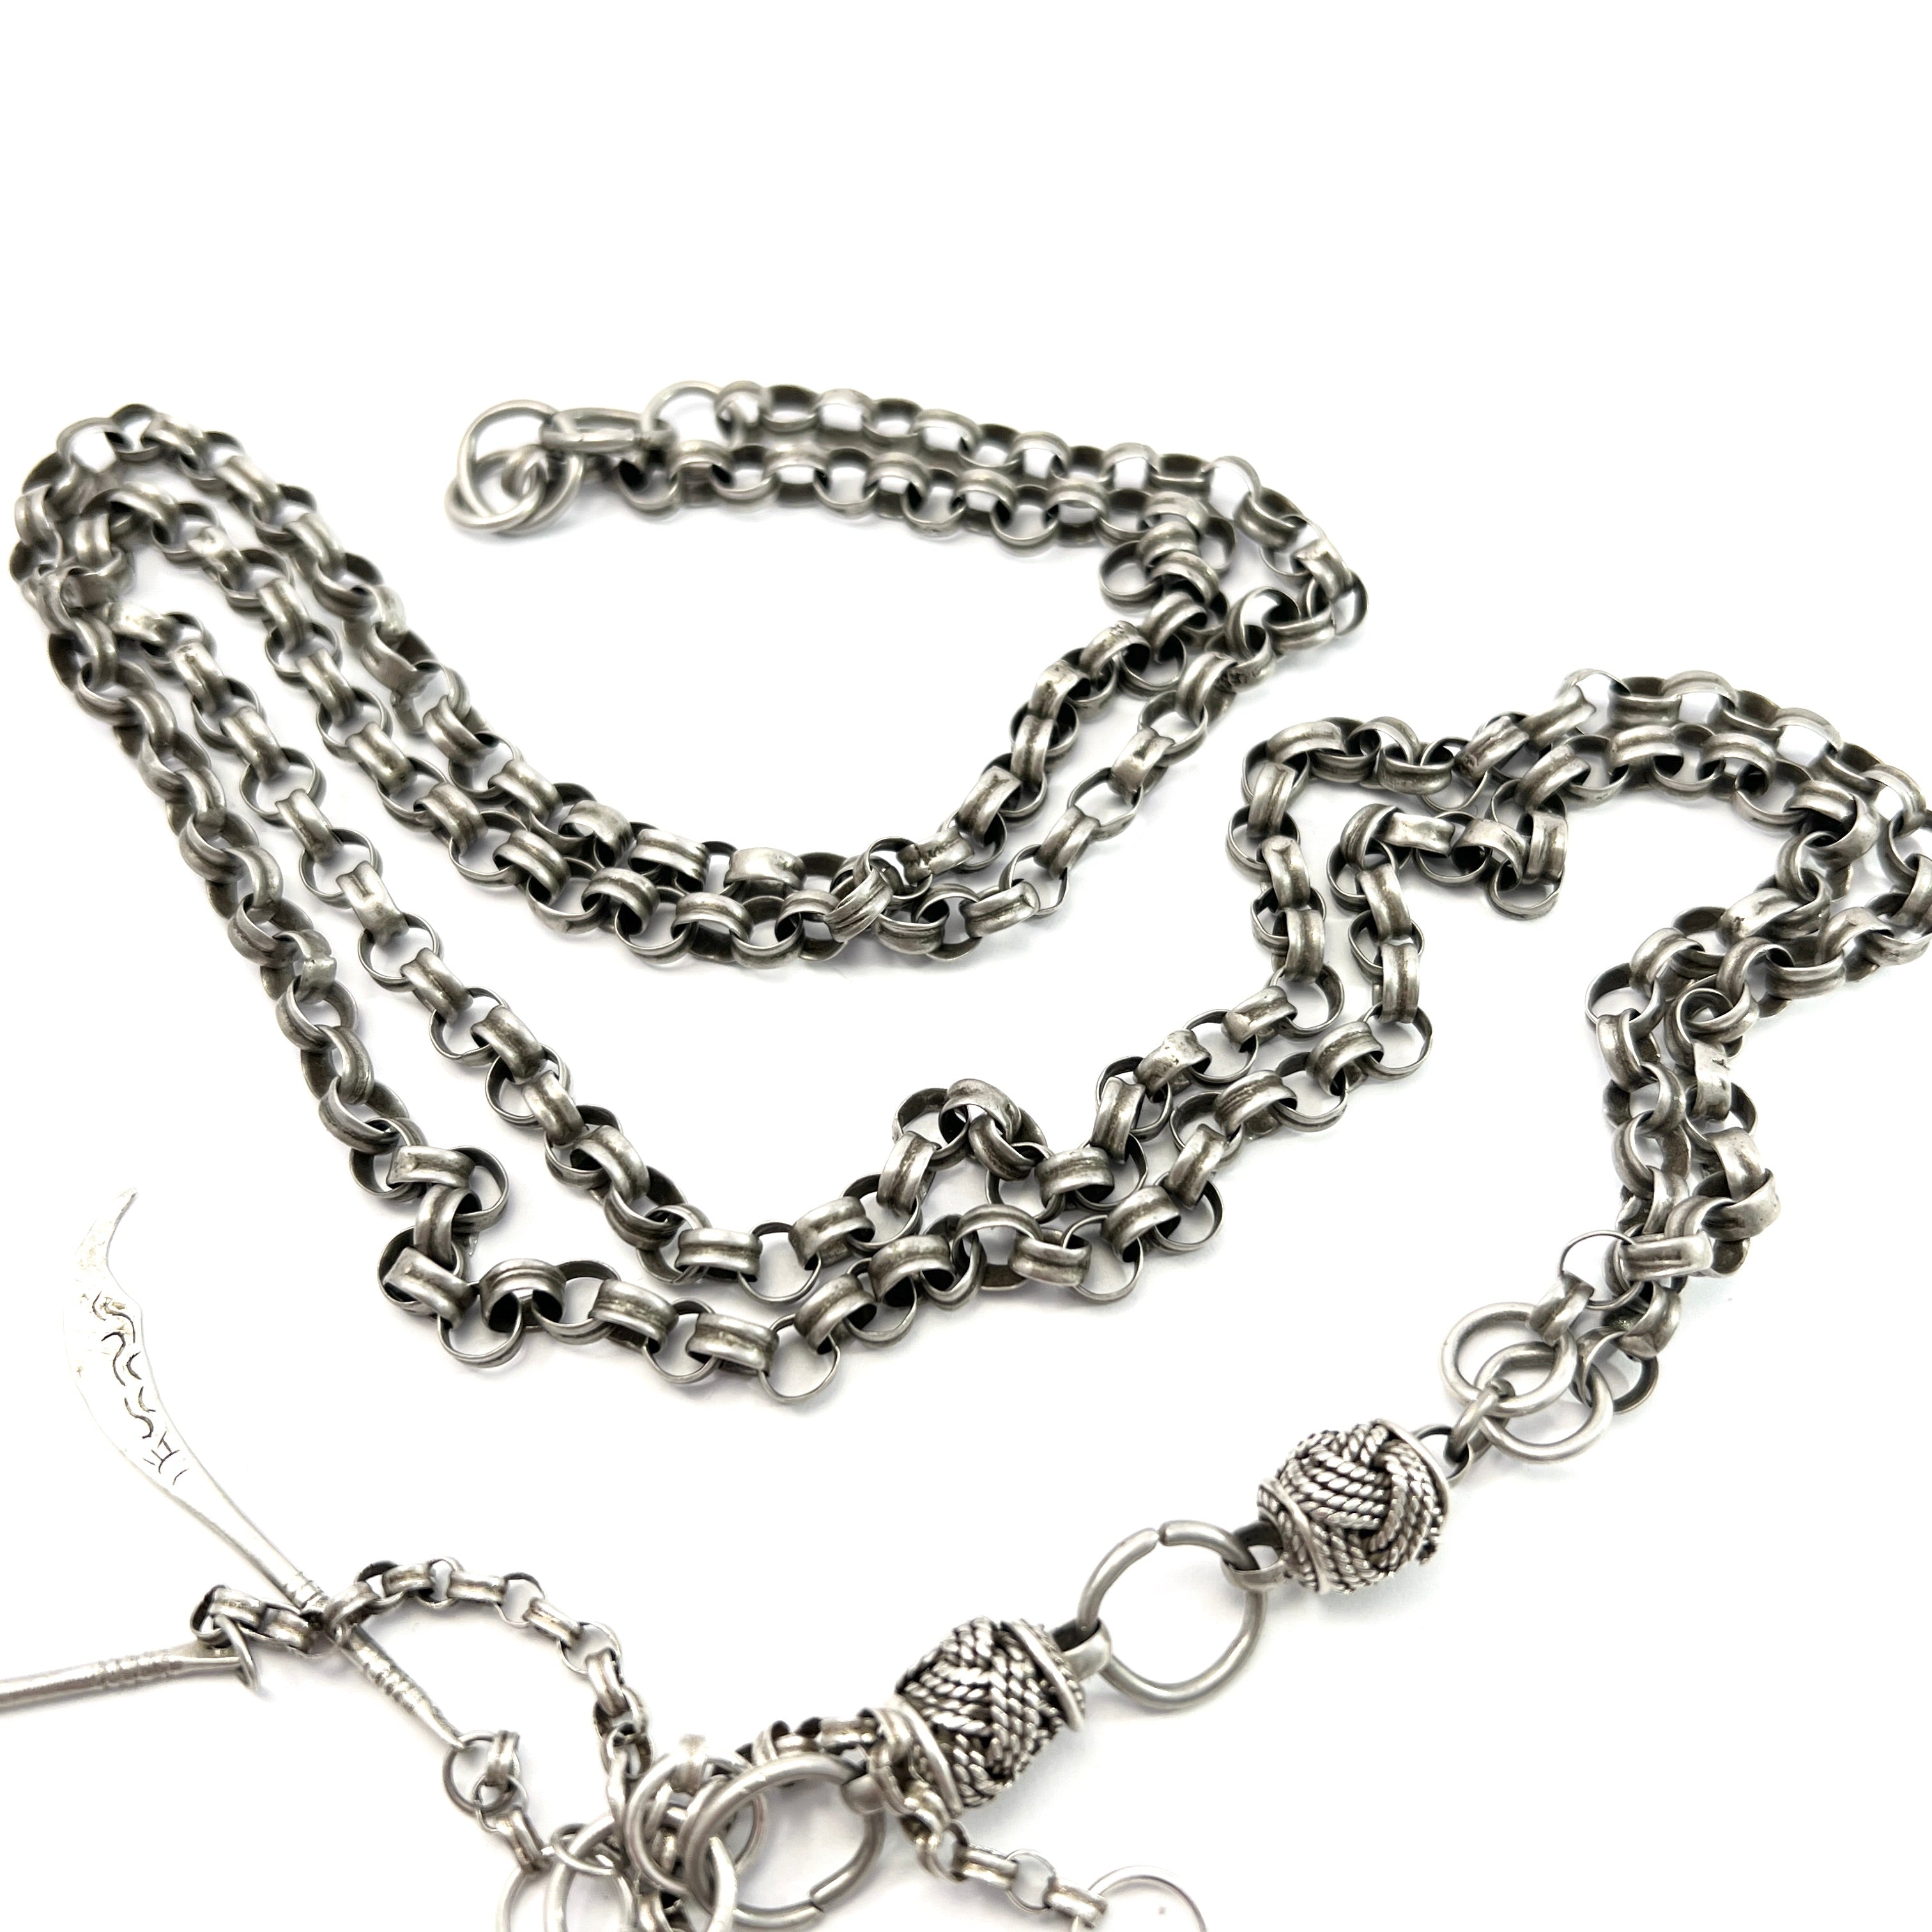 South East Asia Antique or Old Vintage Silver Chain with Opium Pipe Tools. Chatelaine